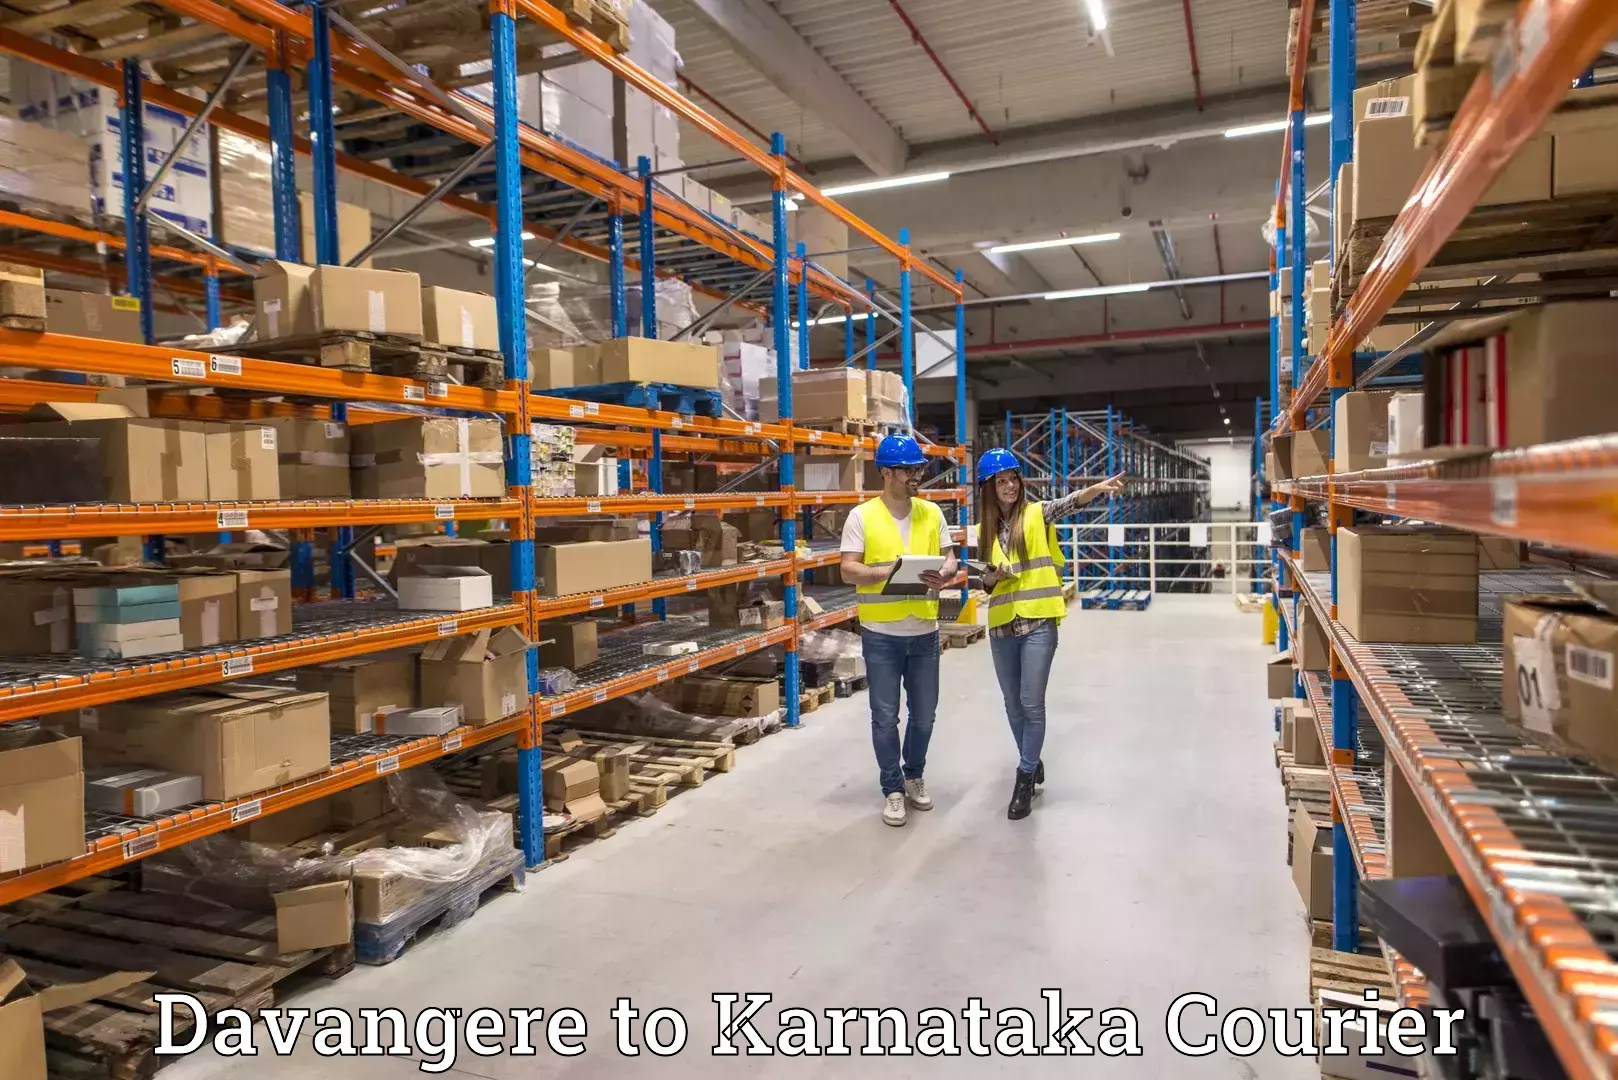 Courier service innovation Davangere to Mangalore Port